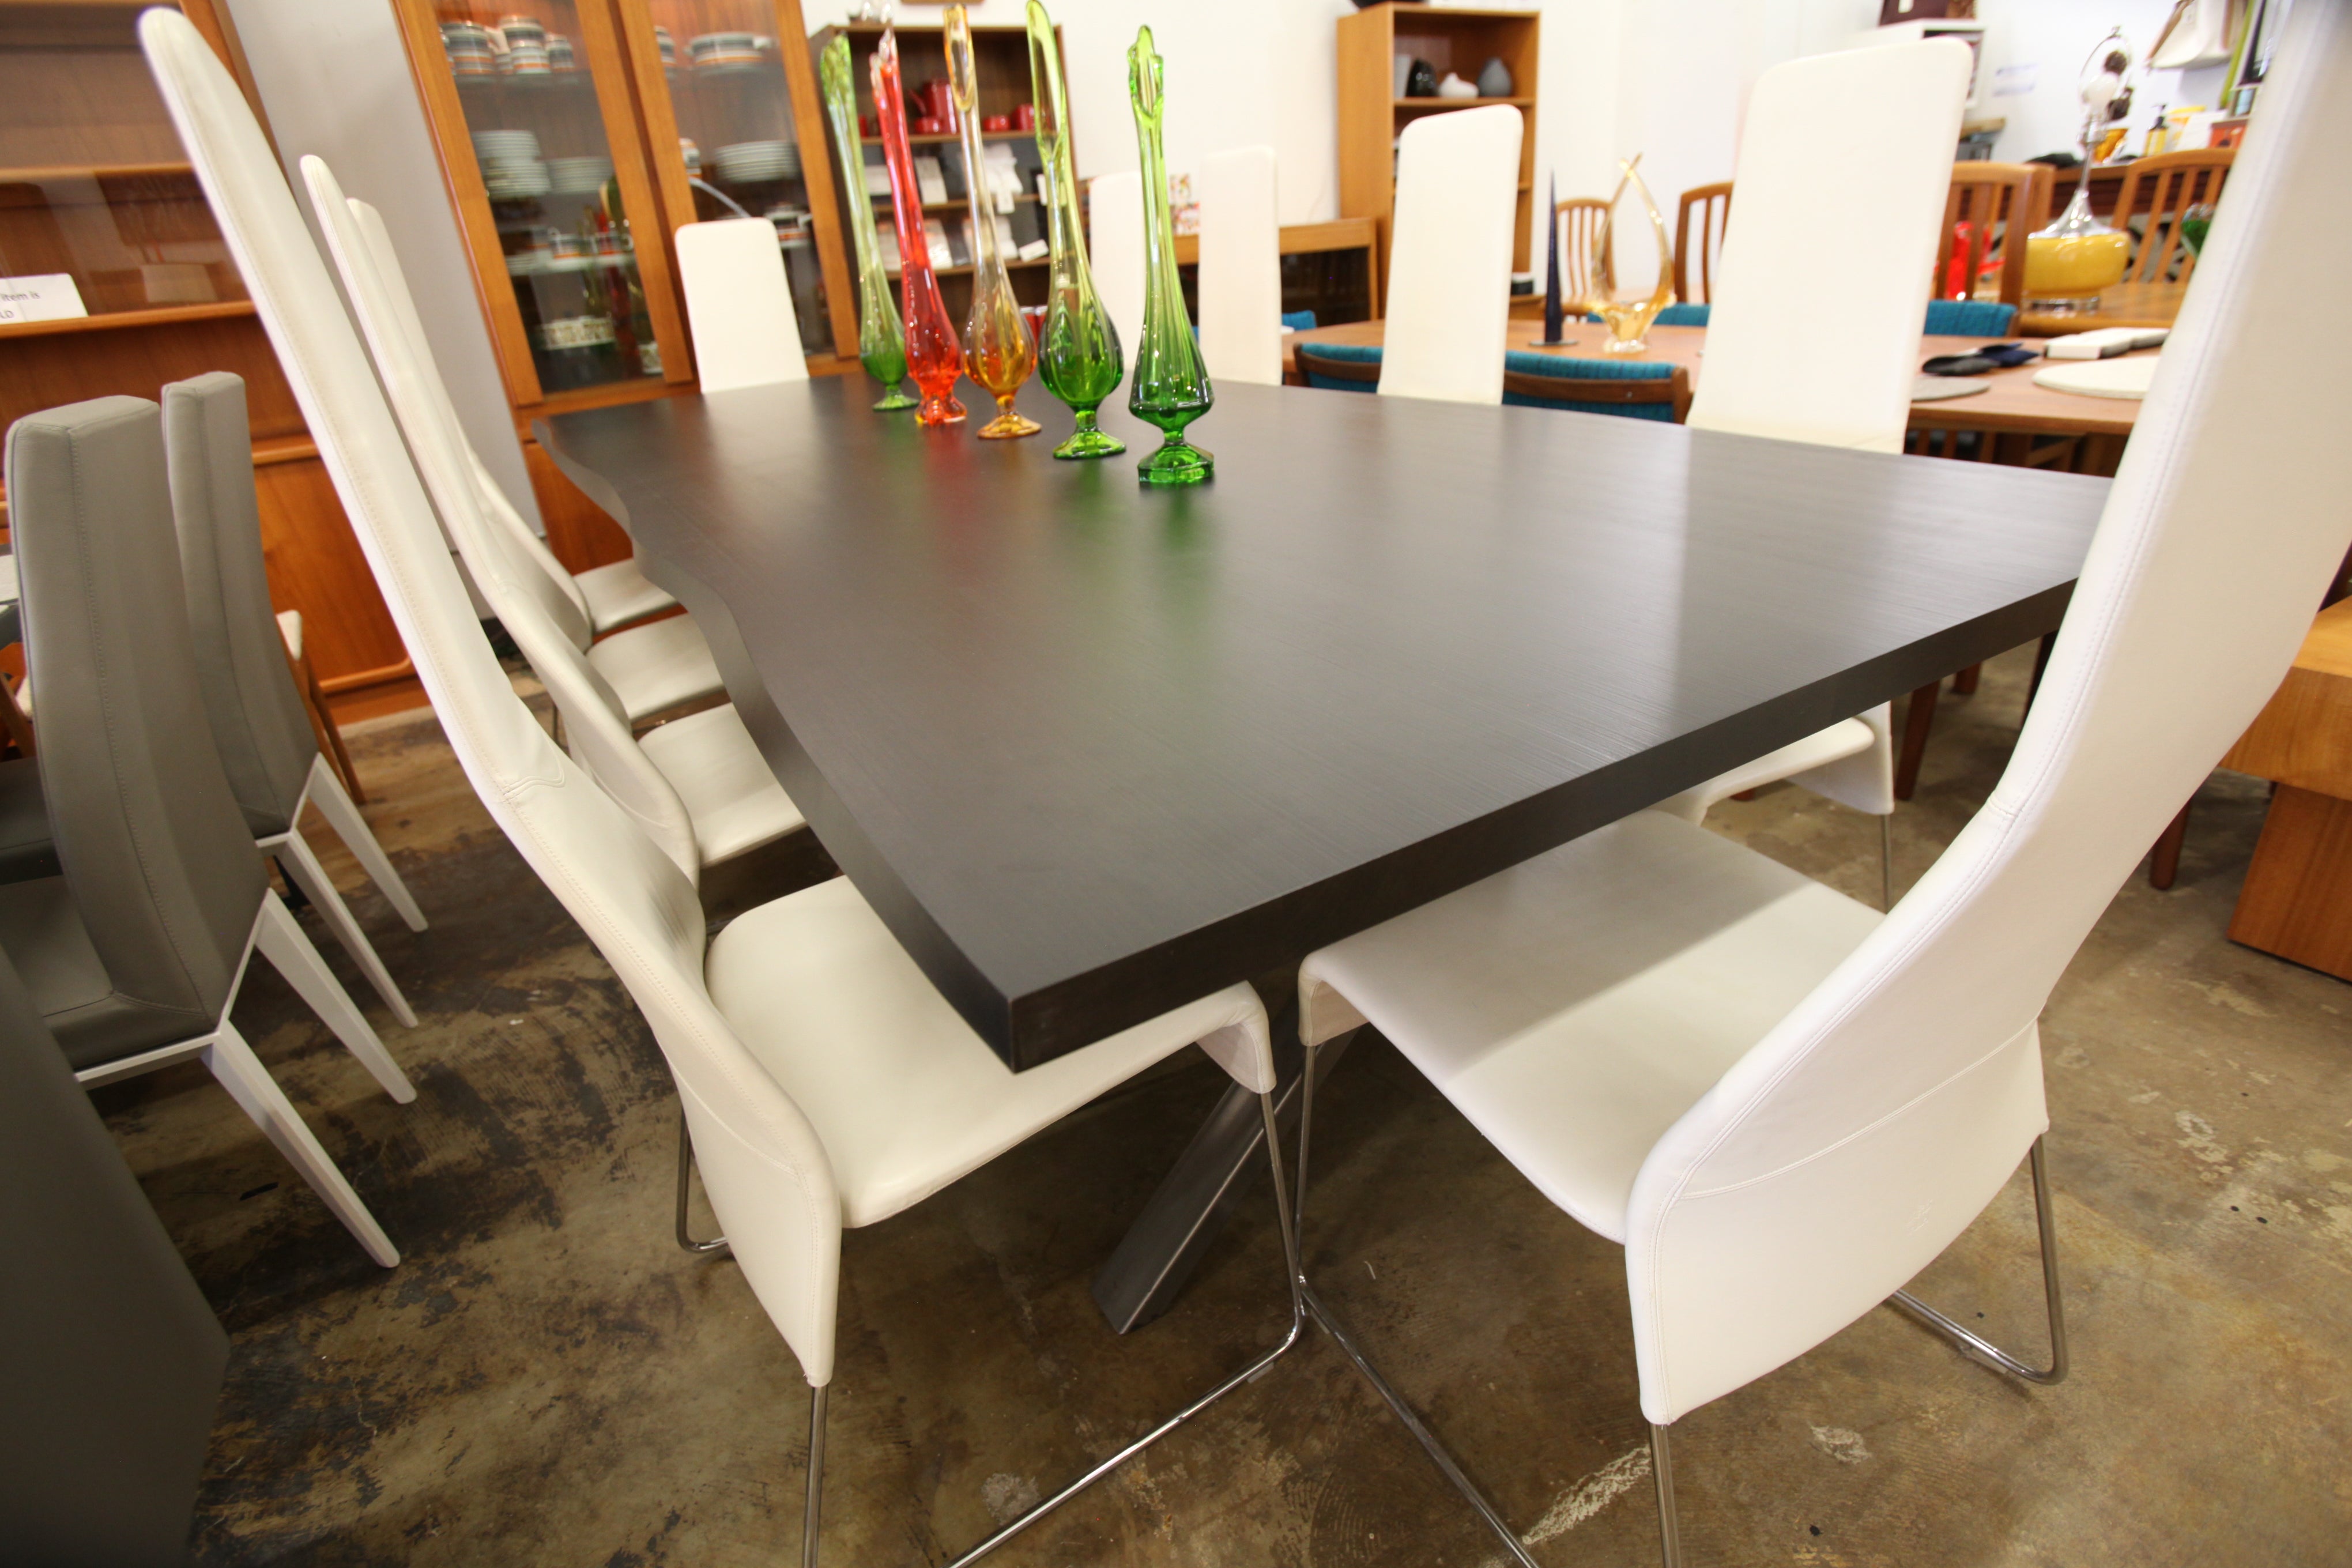 "New" Beautiful Large Live Edge Style Dining Table for 14+ Seats (black)